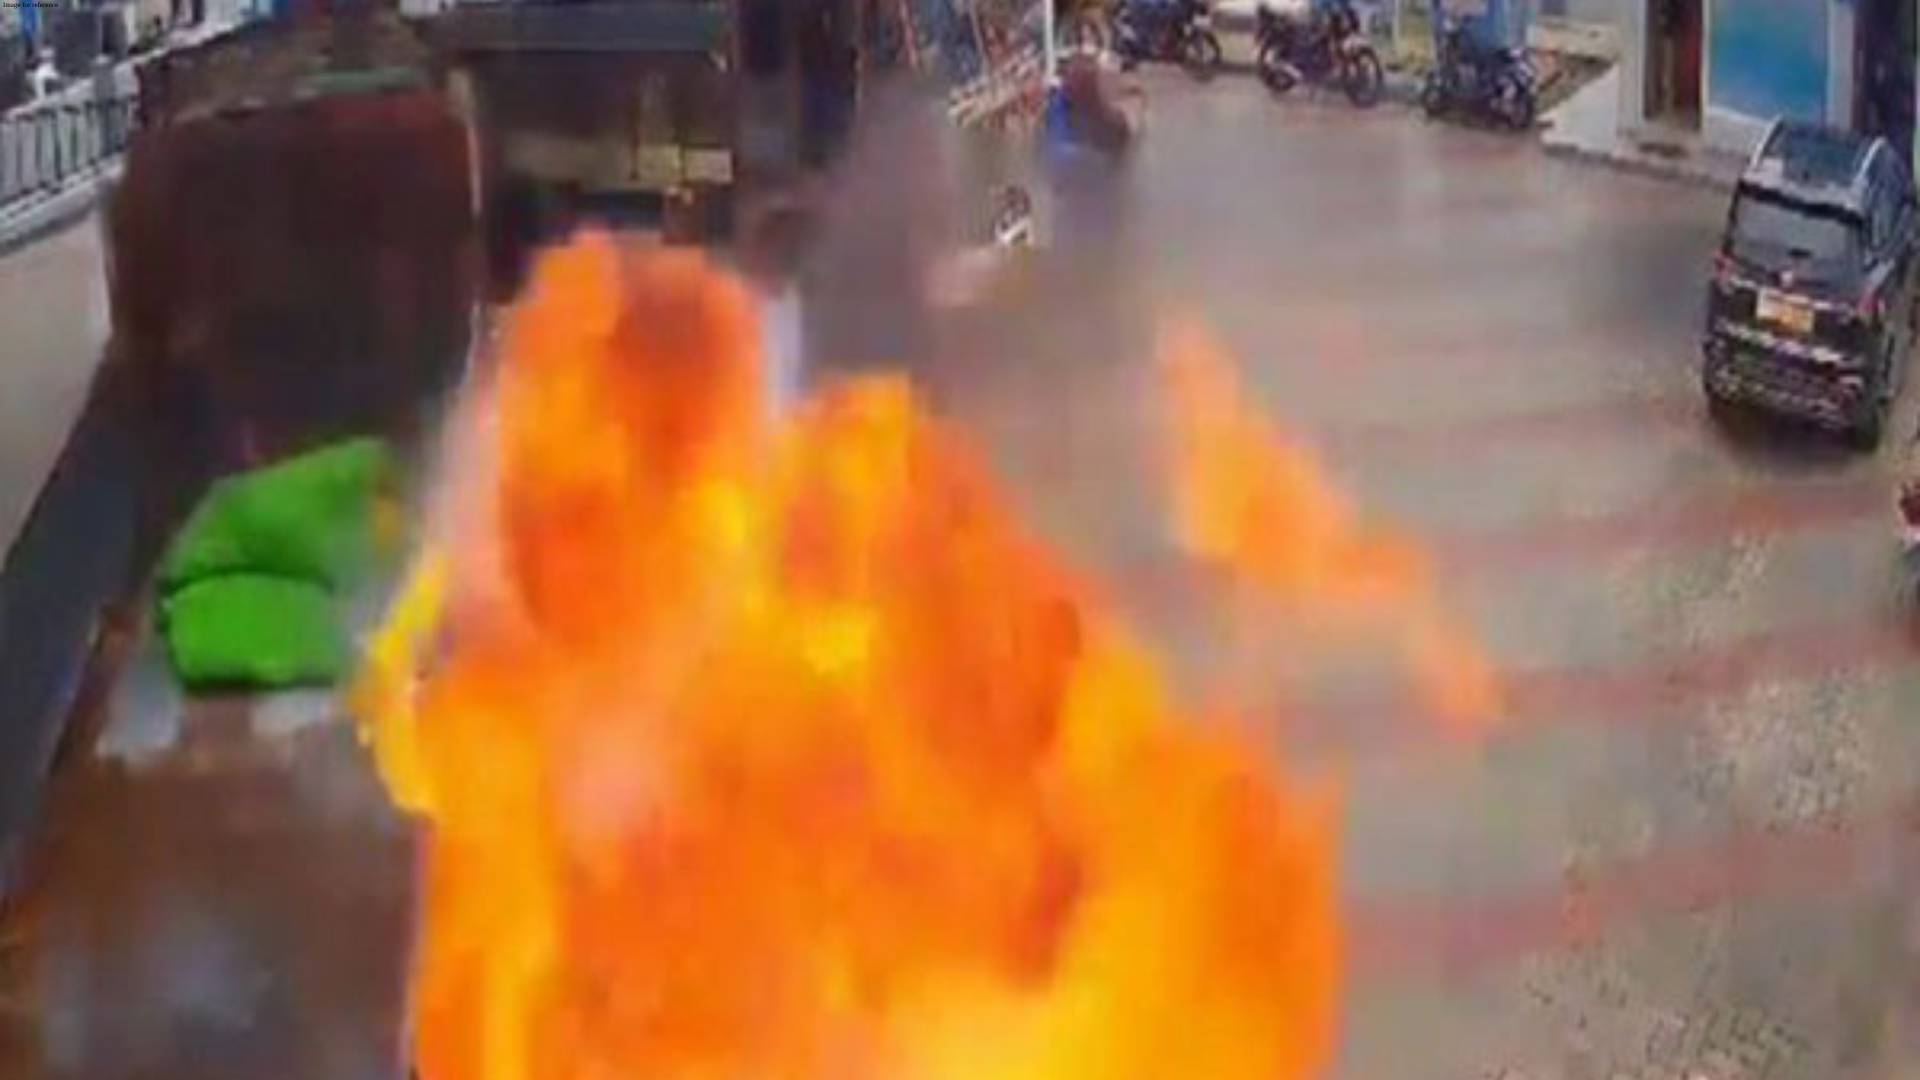 Telengana: Lorry catches fire at petrol pump; no casualties reported